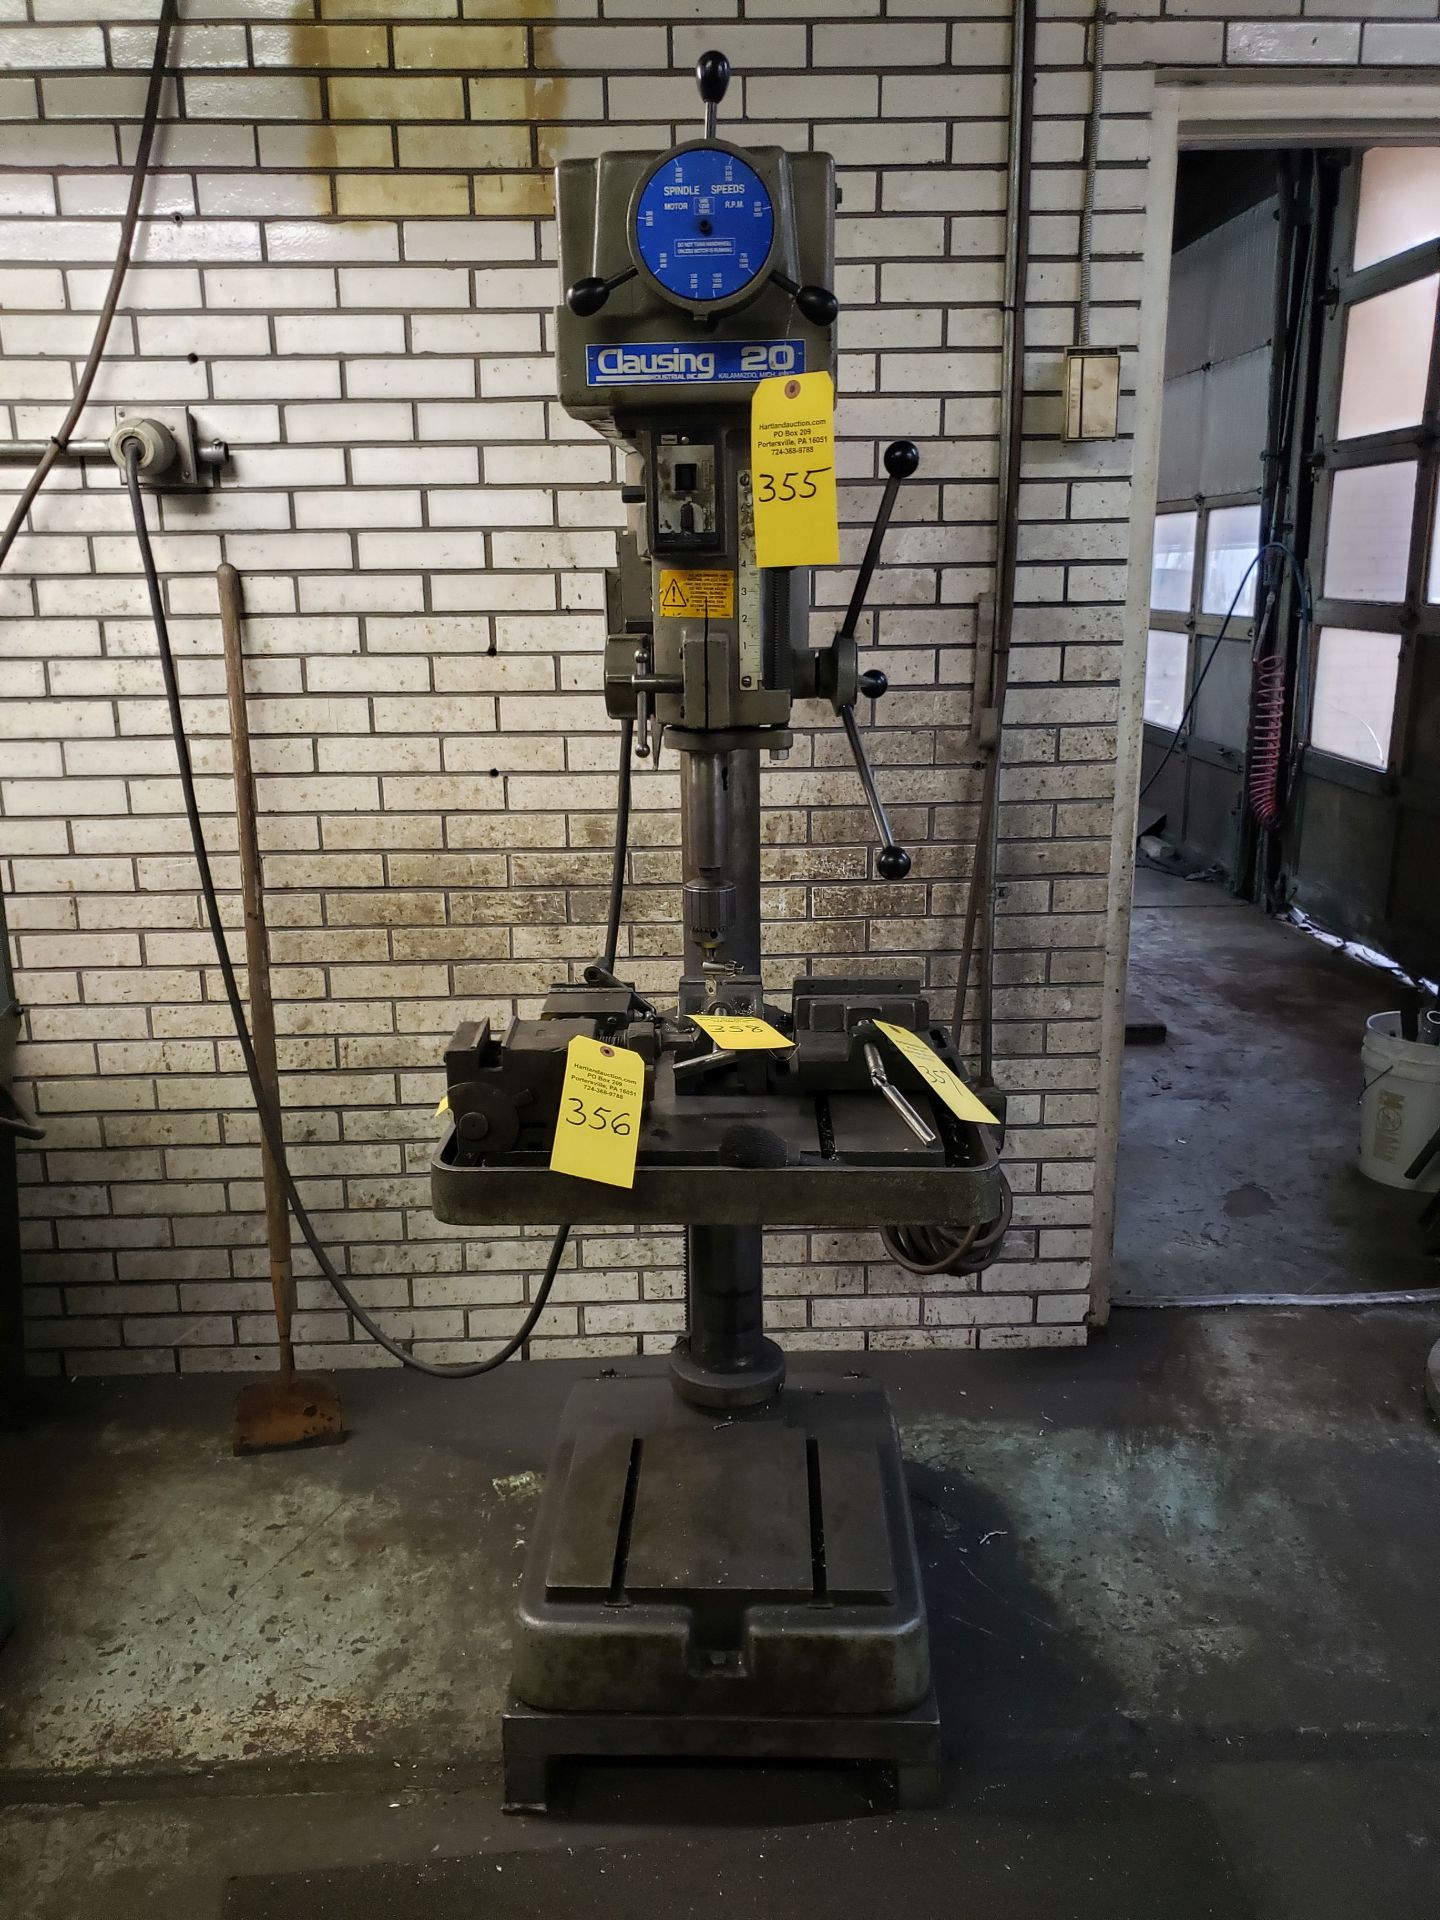 CLAUSING MODEL 20 DRILL PRESS 22”x19.5” table, 2000 RPM spindle speed, Mo 2275, SN 20-531972,